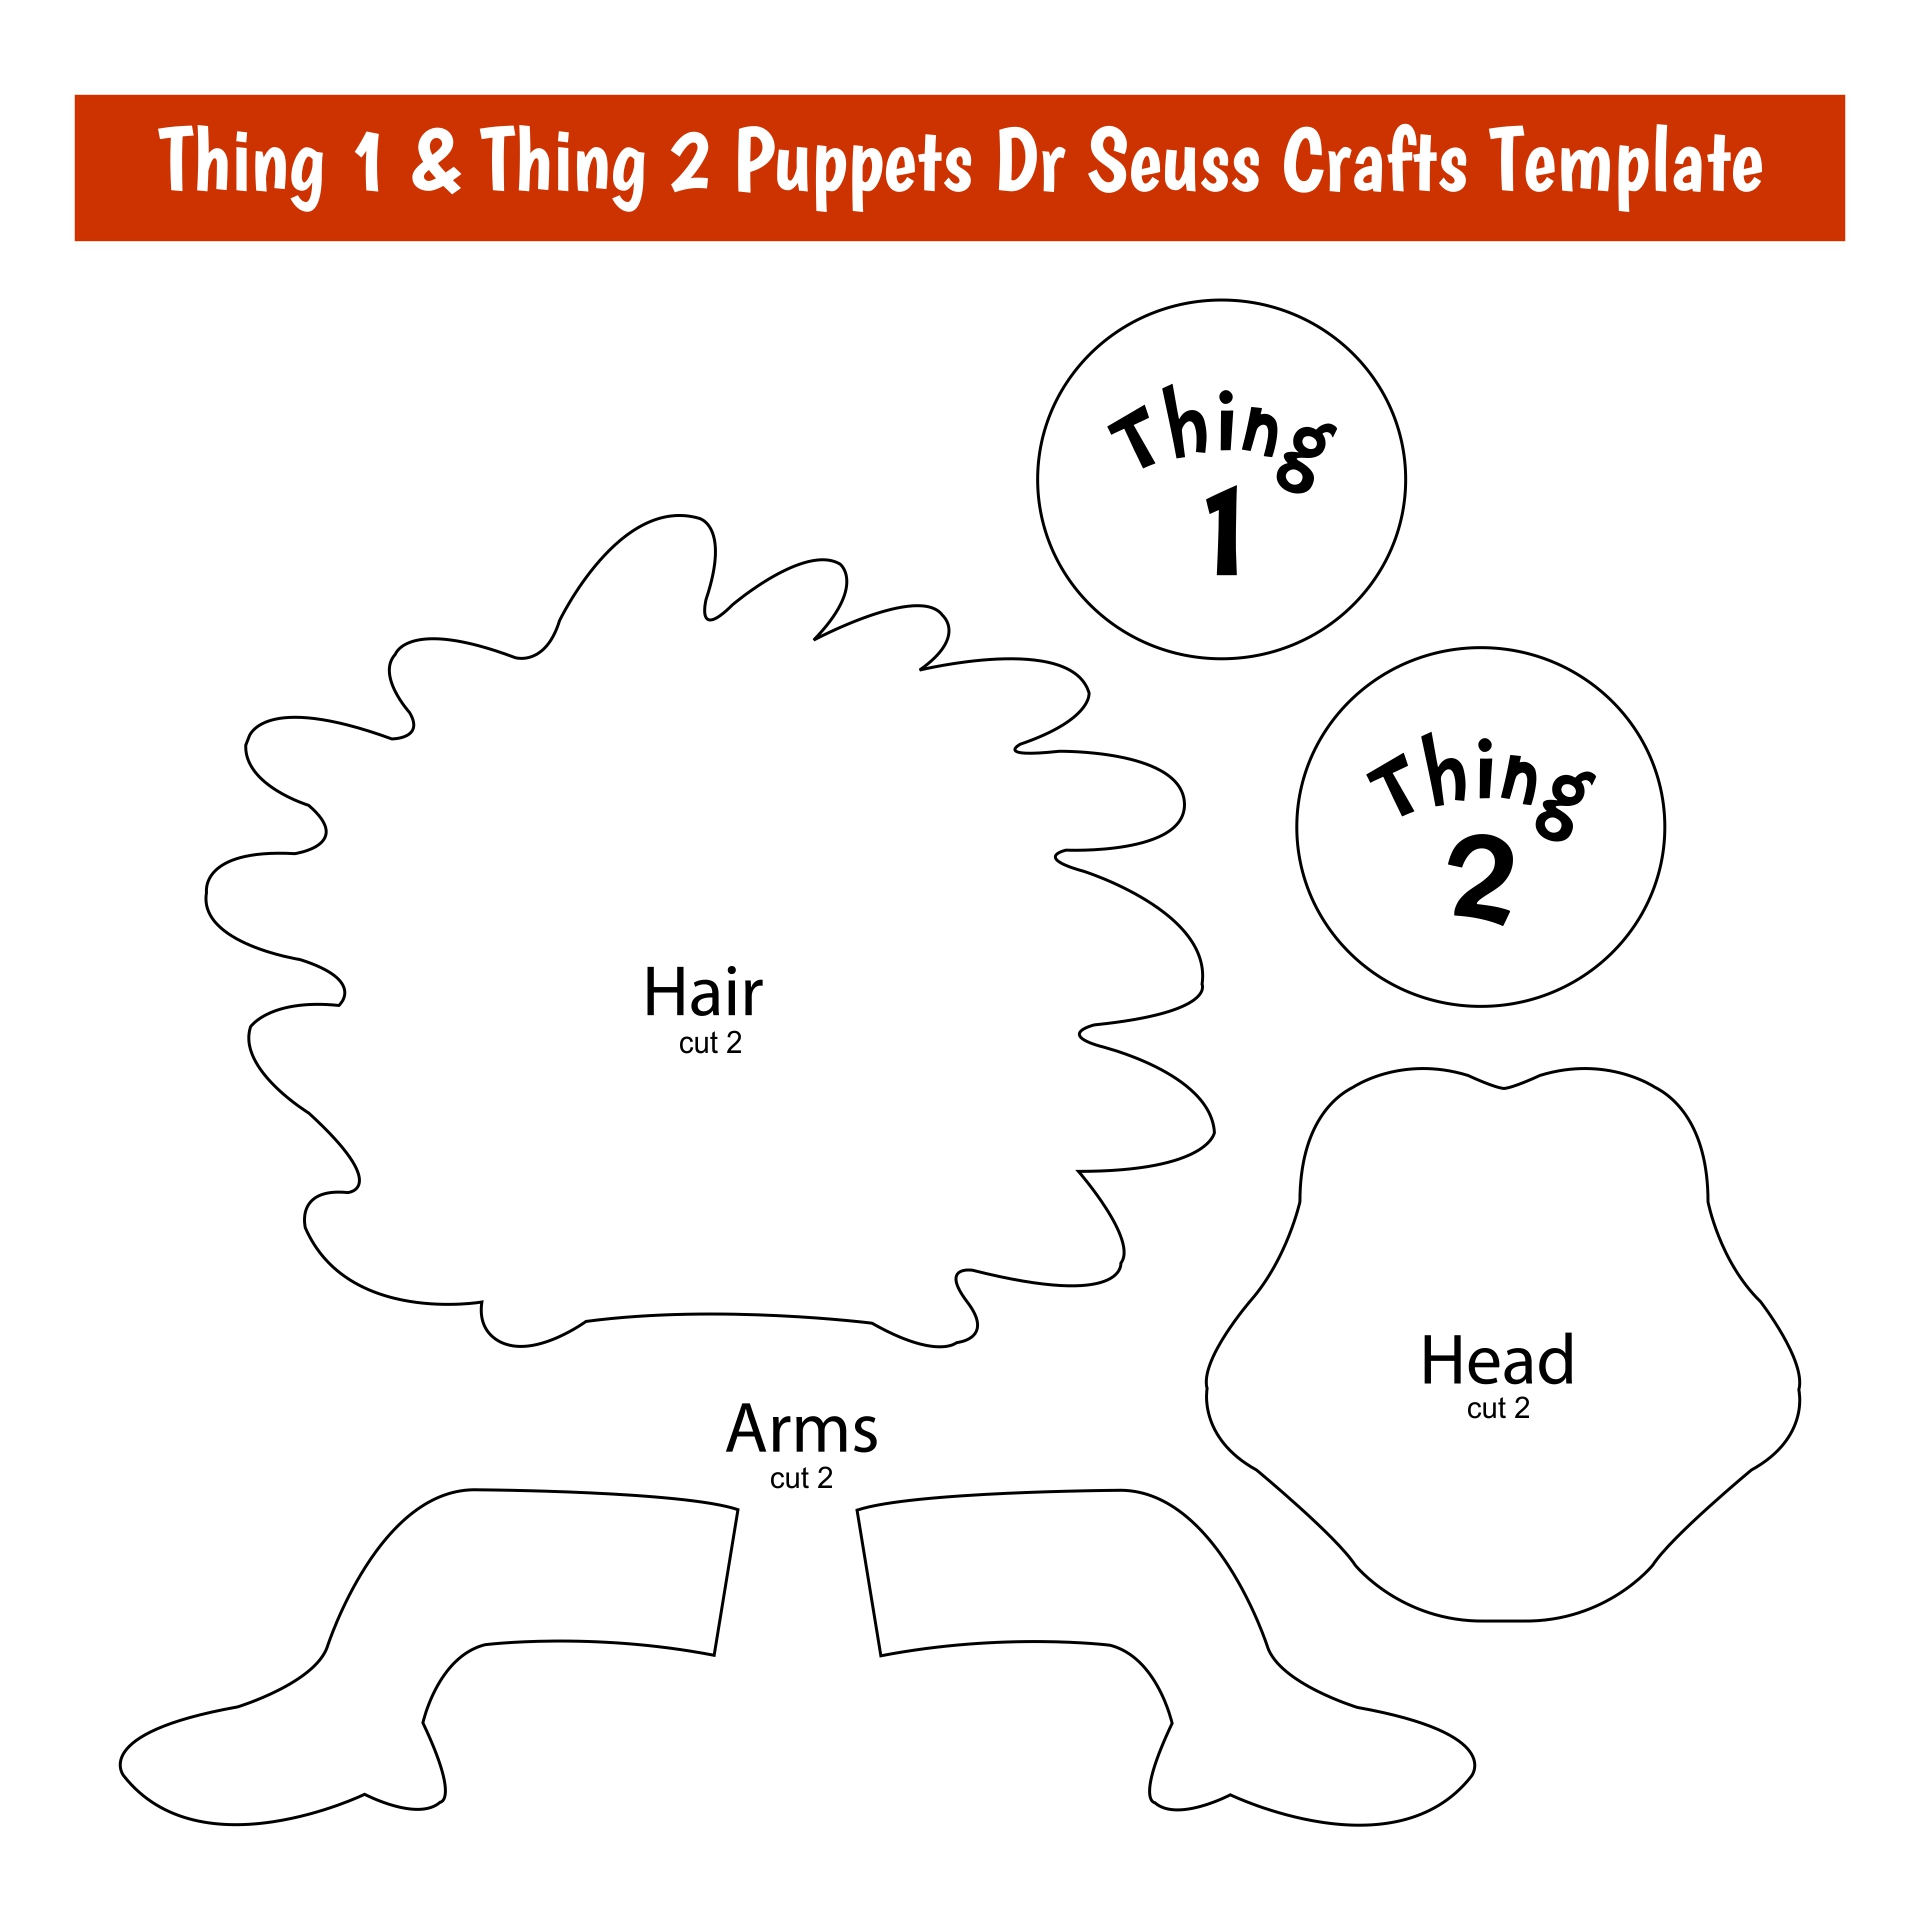 Thing 1 & Thing 2 Puppets Dr Seuss Crafts Printable Template